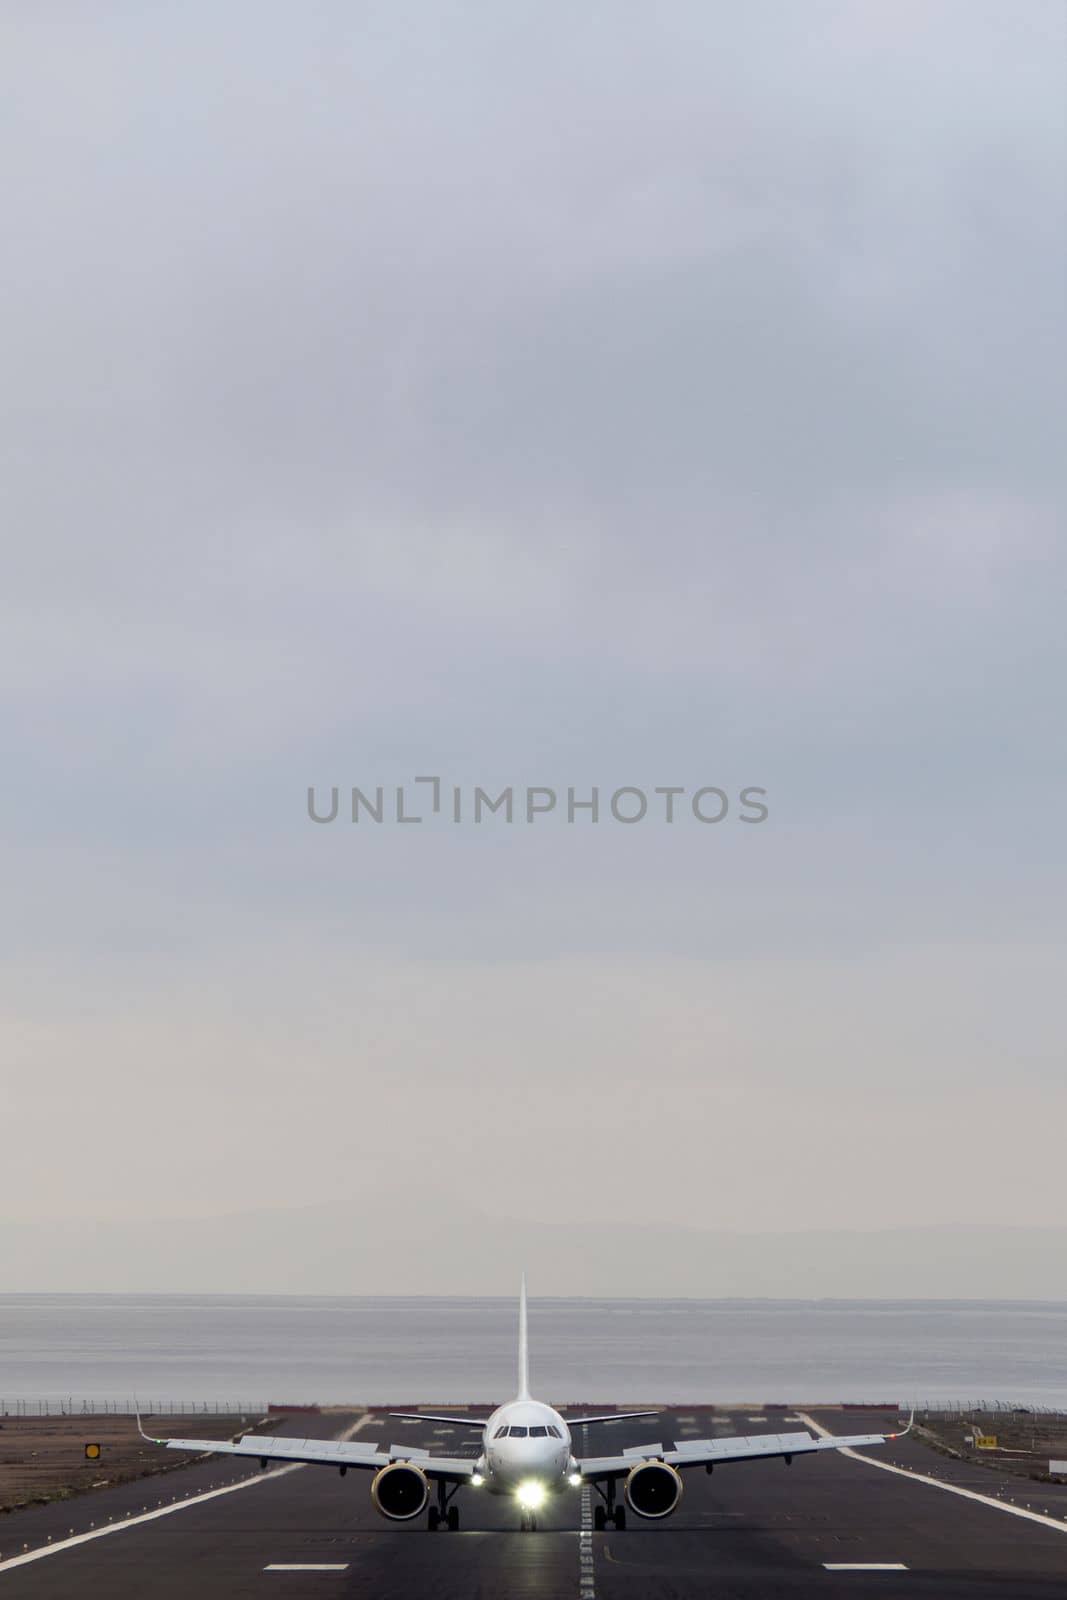 Frontal vertical shot of airplane takes off on a foggy day against the background of a gray sky